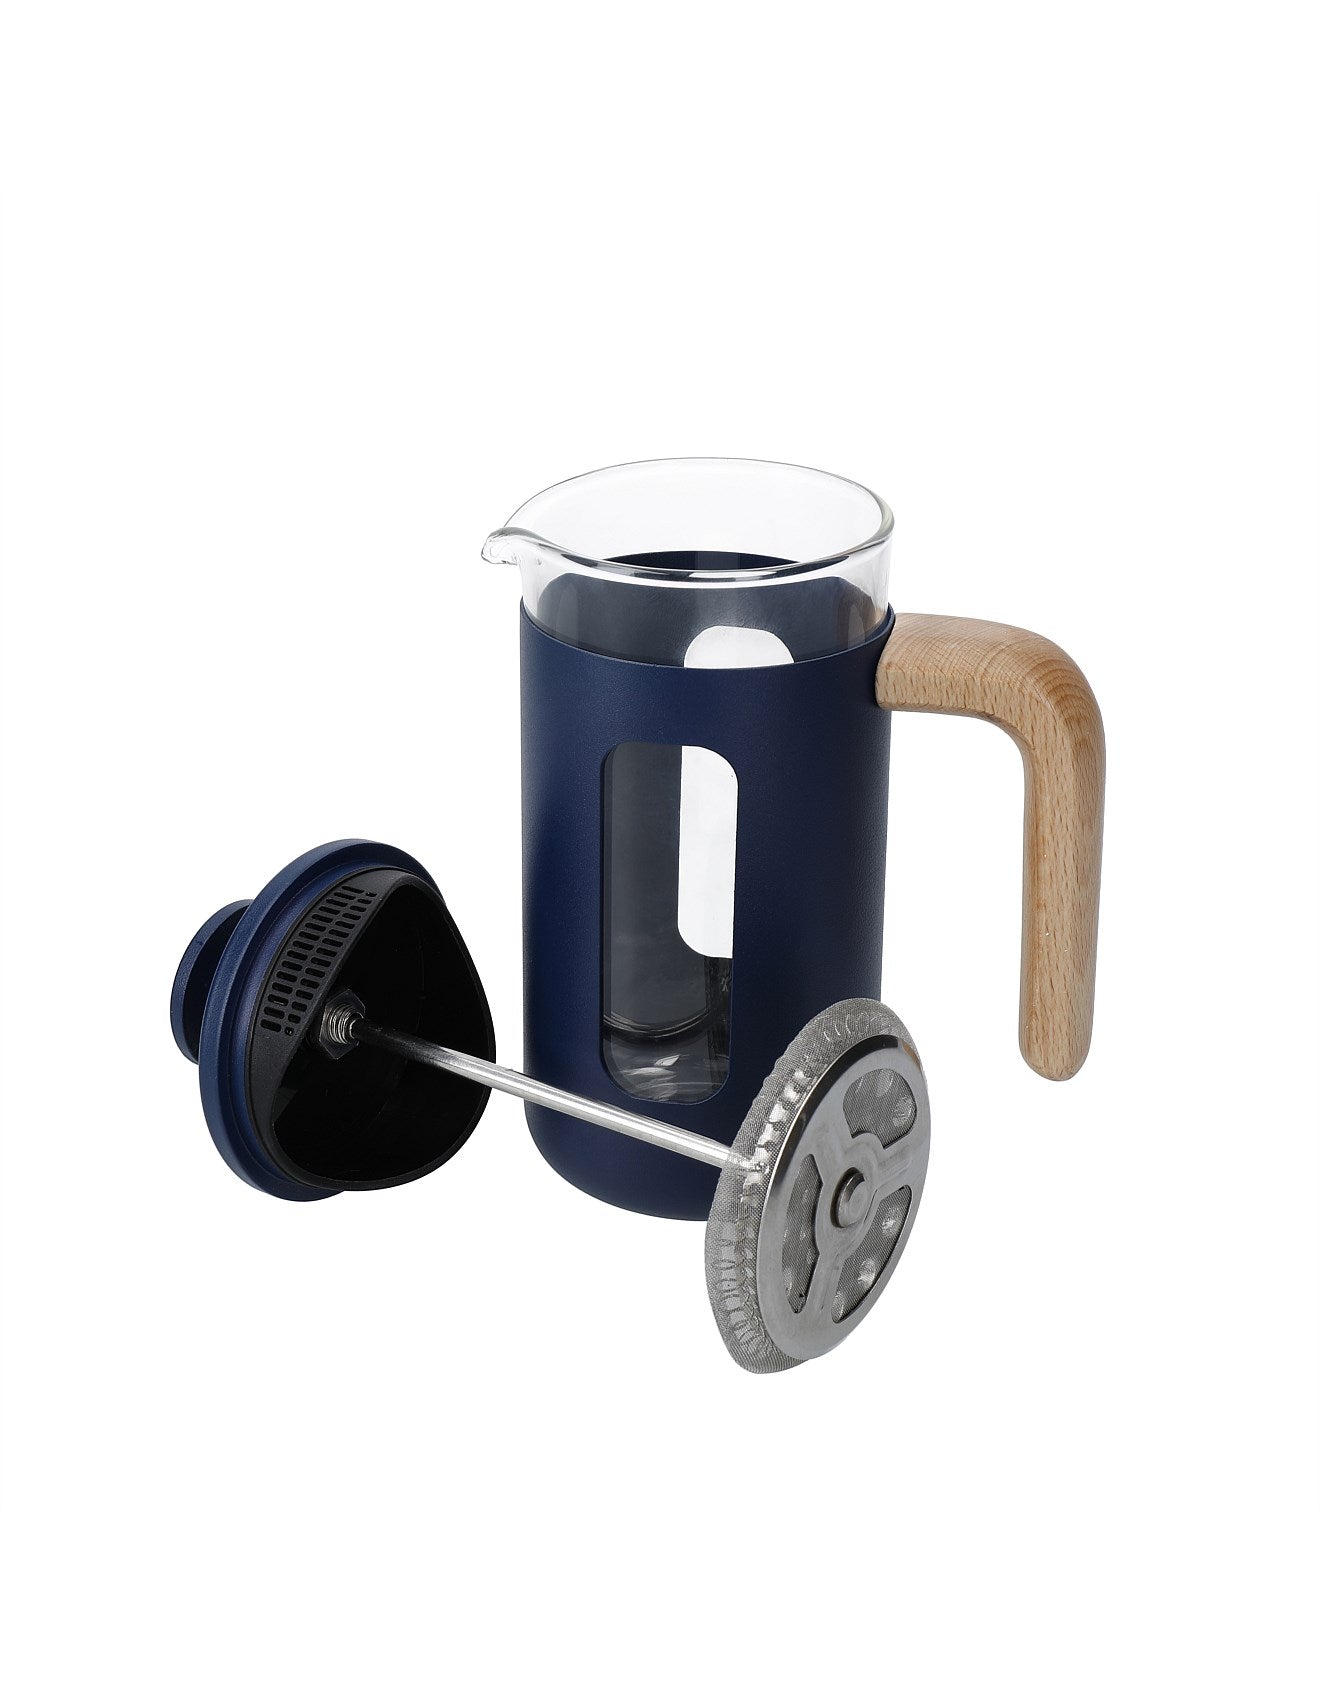 La Cafetière Pisa Stainless Steel Coffee Maker - 3 Cup/350ml - Navy With Beech Wood Handle